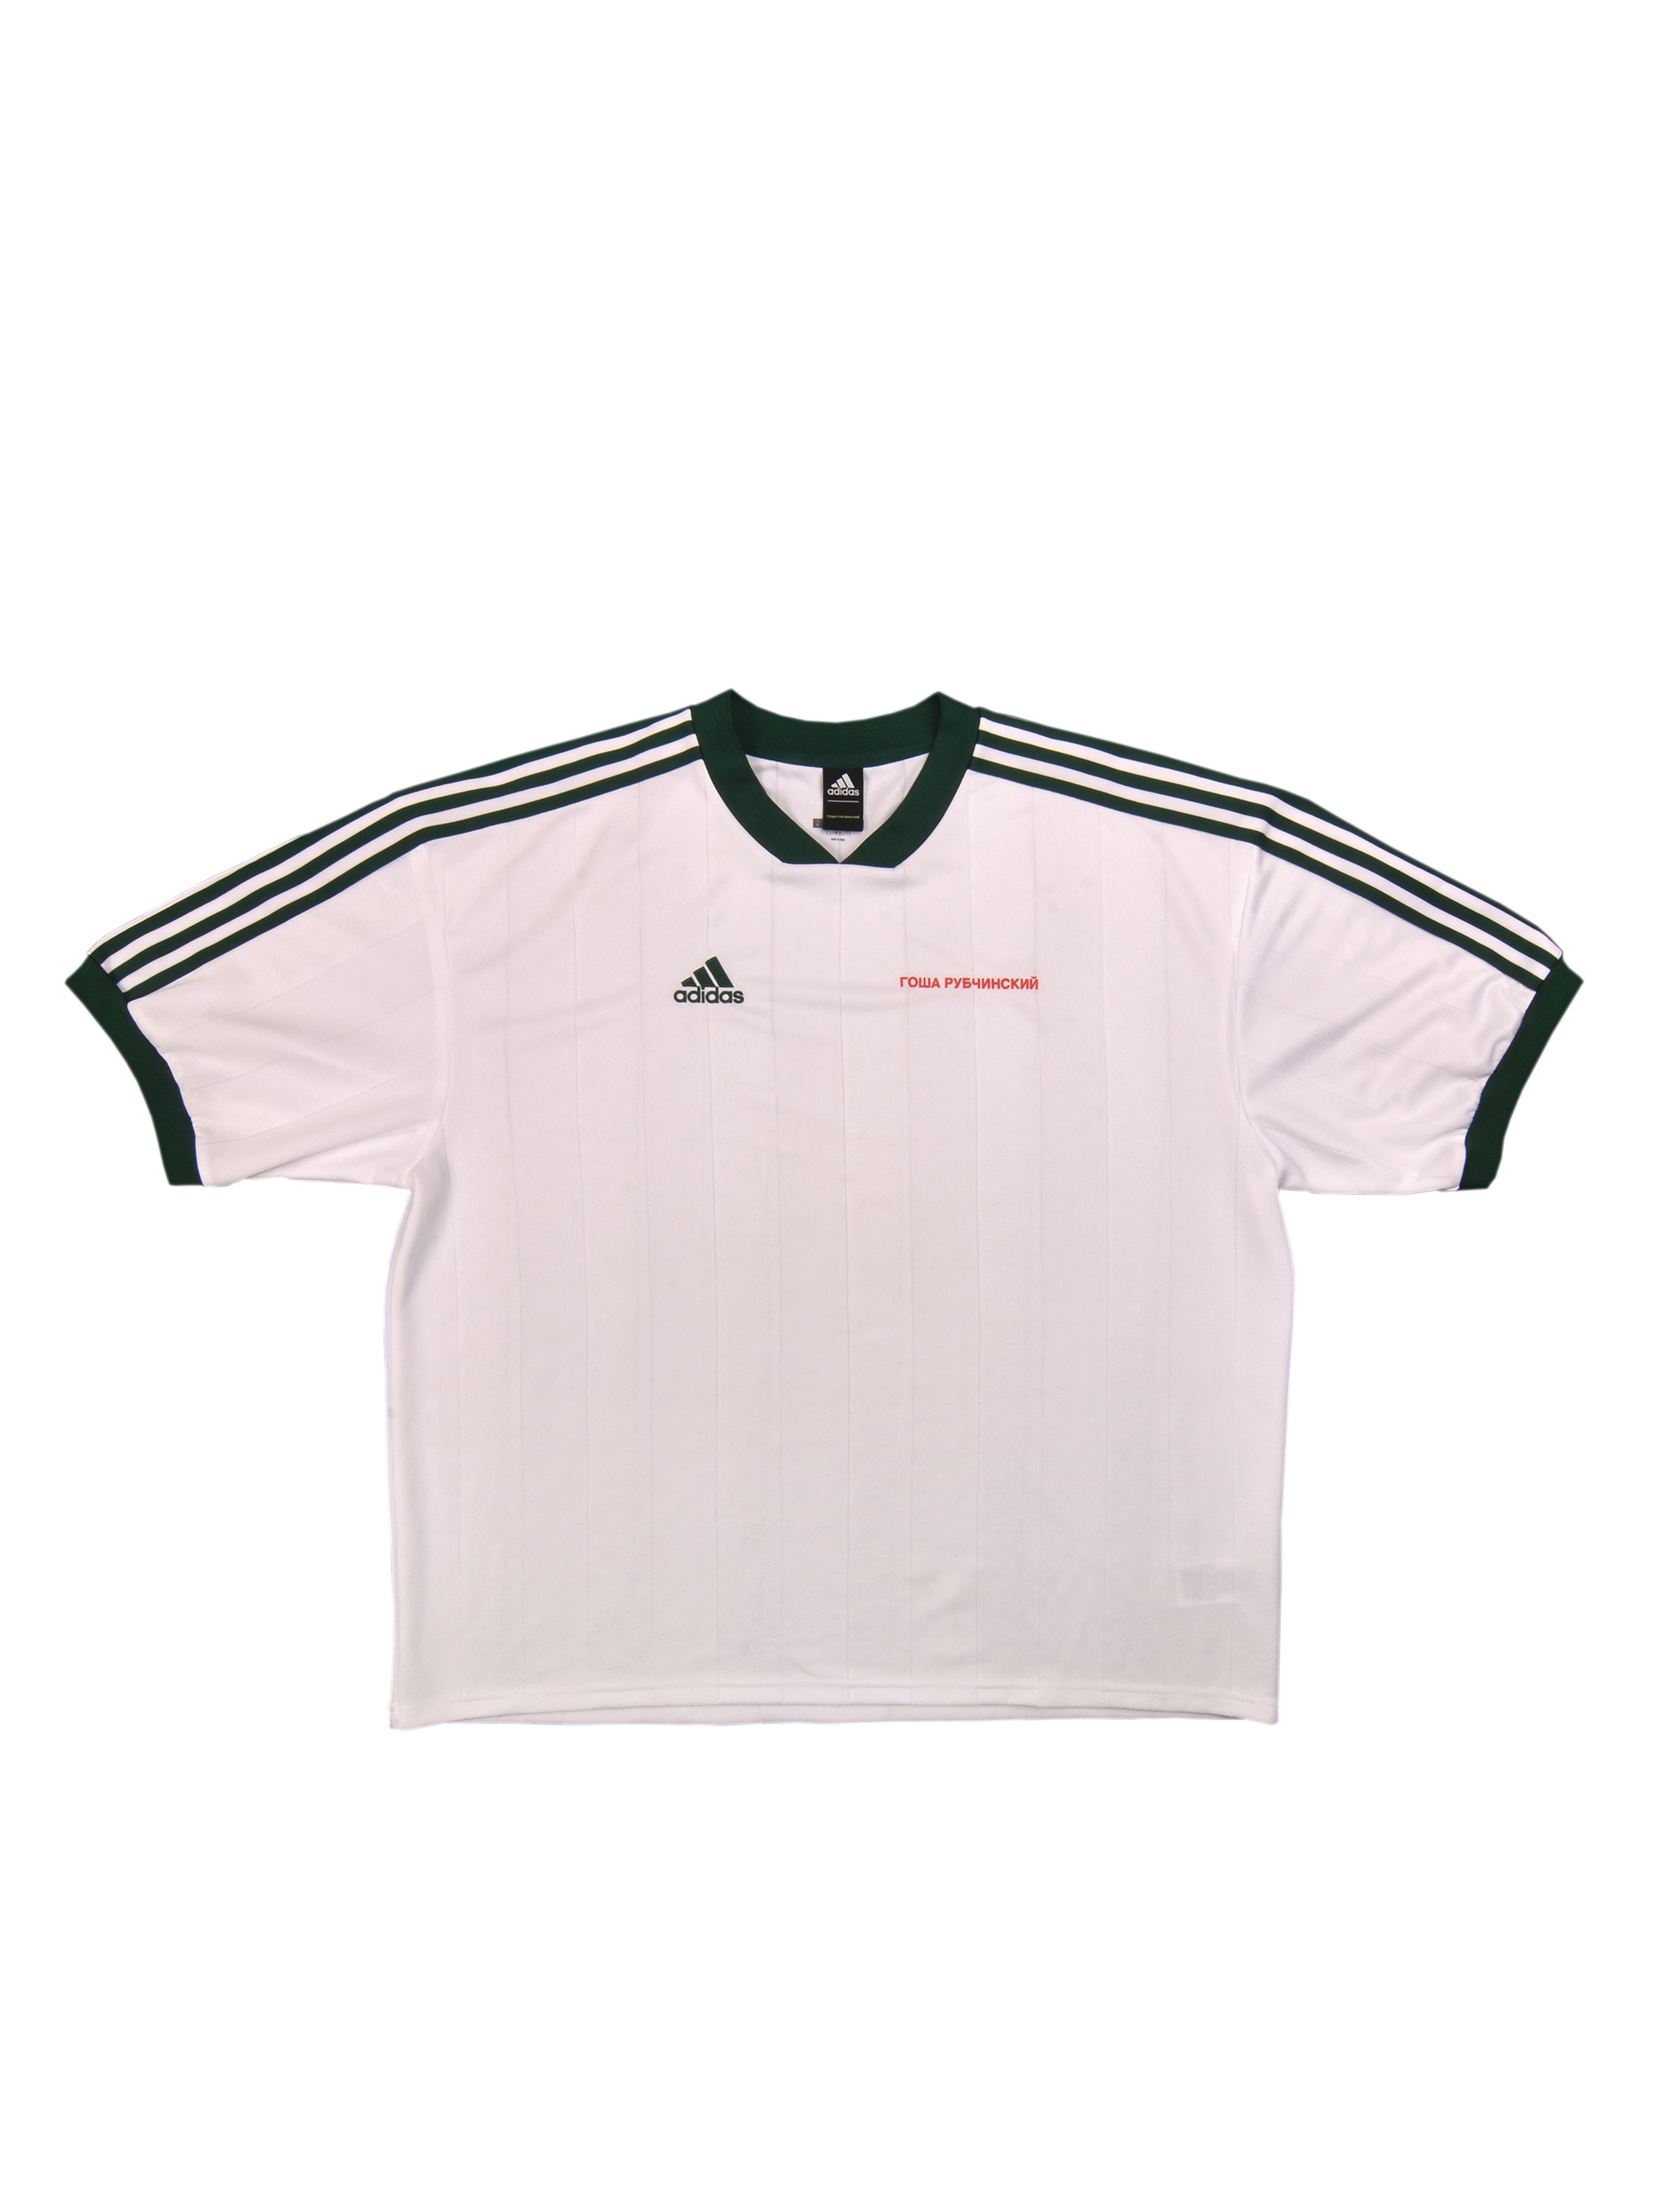 Adidas Soccer Jersey Size US M / EU 48-50 / 2 - 1 Preview